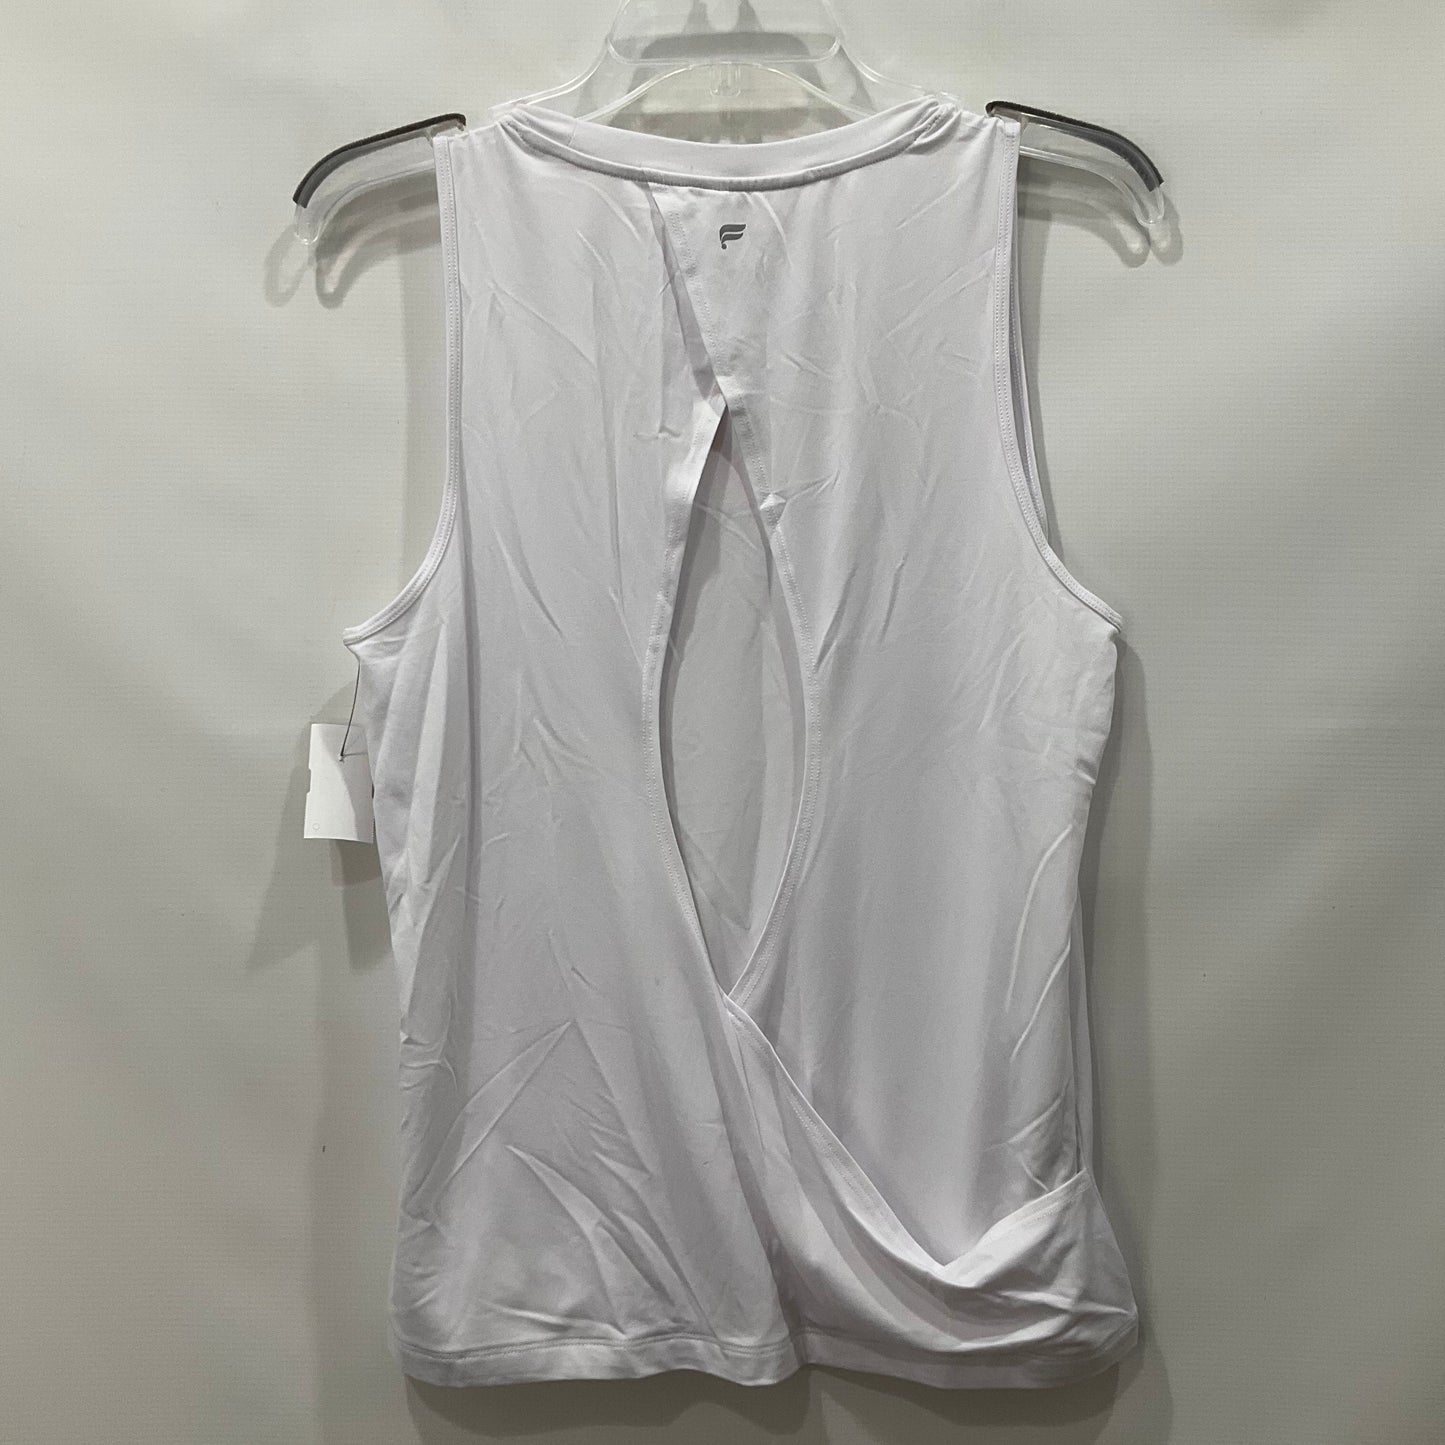 White Athletic Tank Top Fabletics, Size S